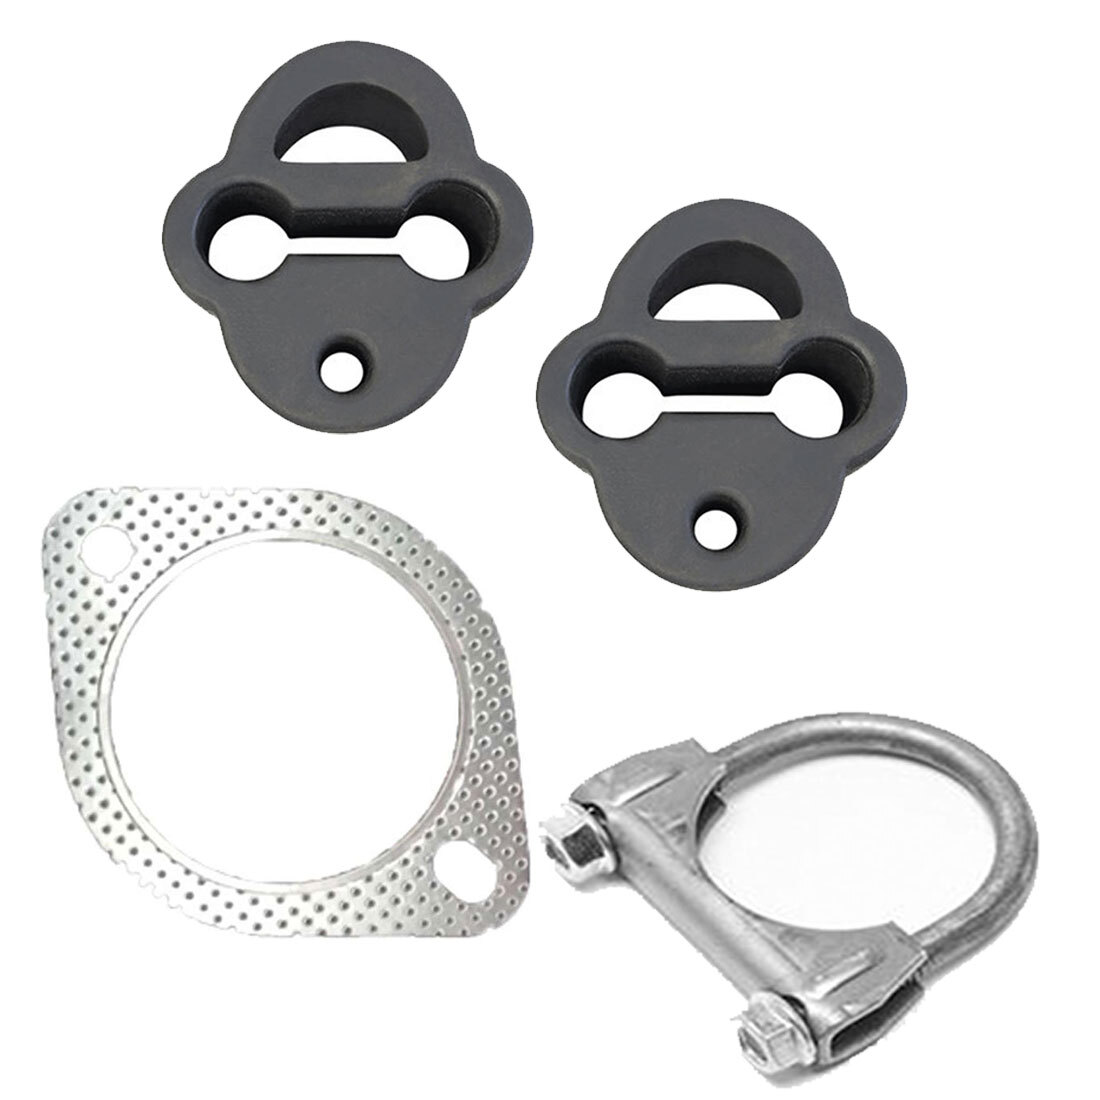 Exhaust Fitting Kit with Rubber Hangers Clamp and Gasket for Ford Falcon image